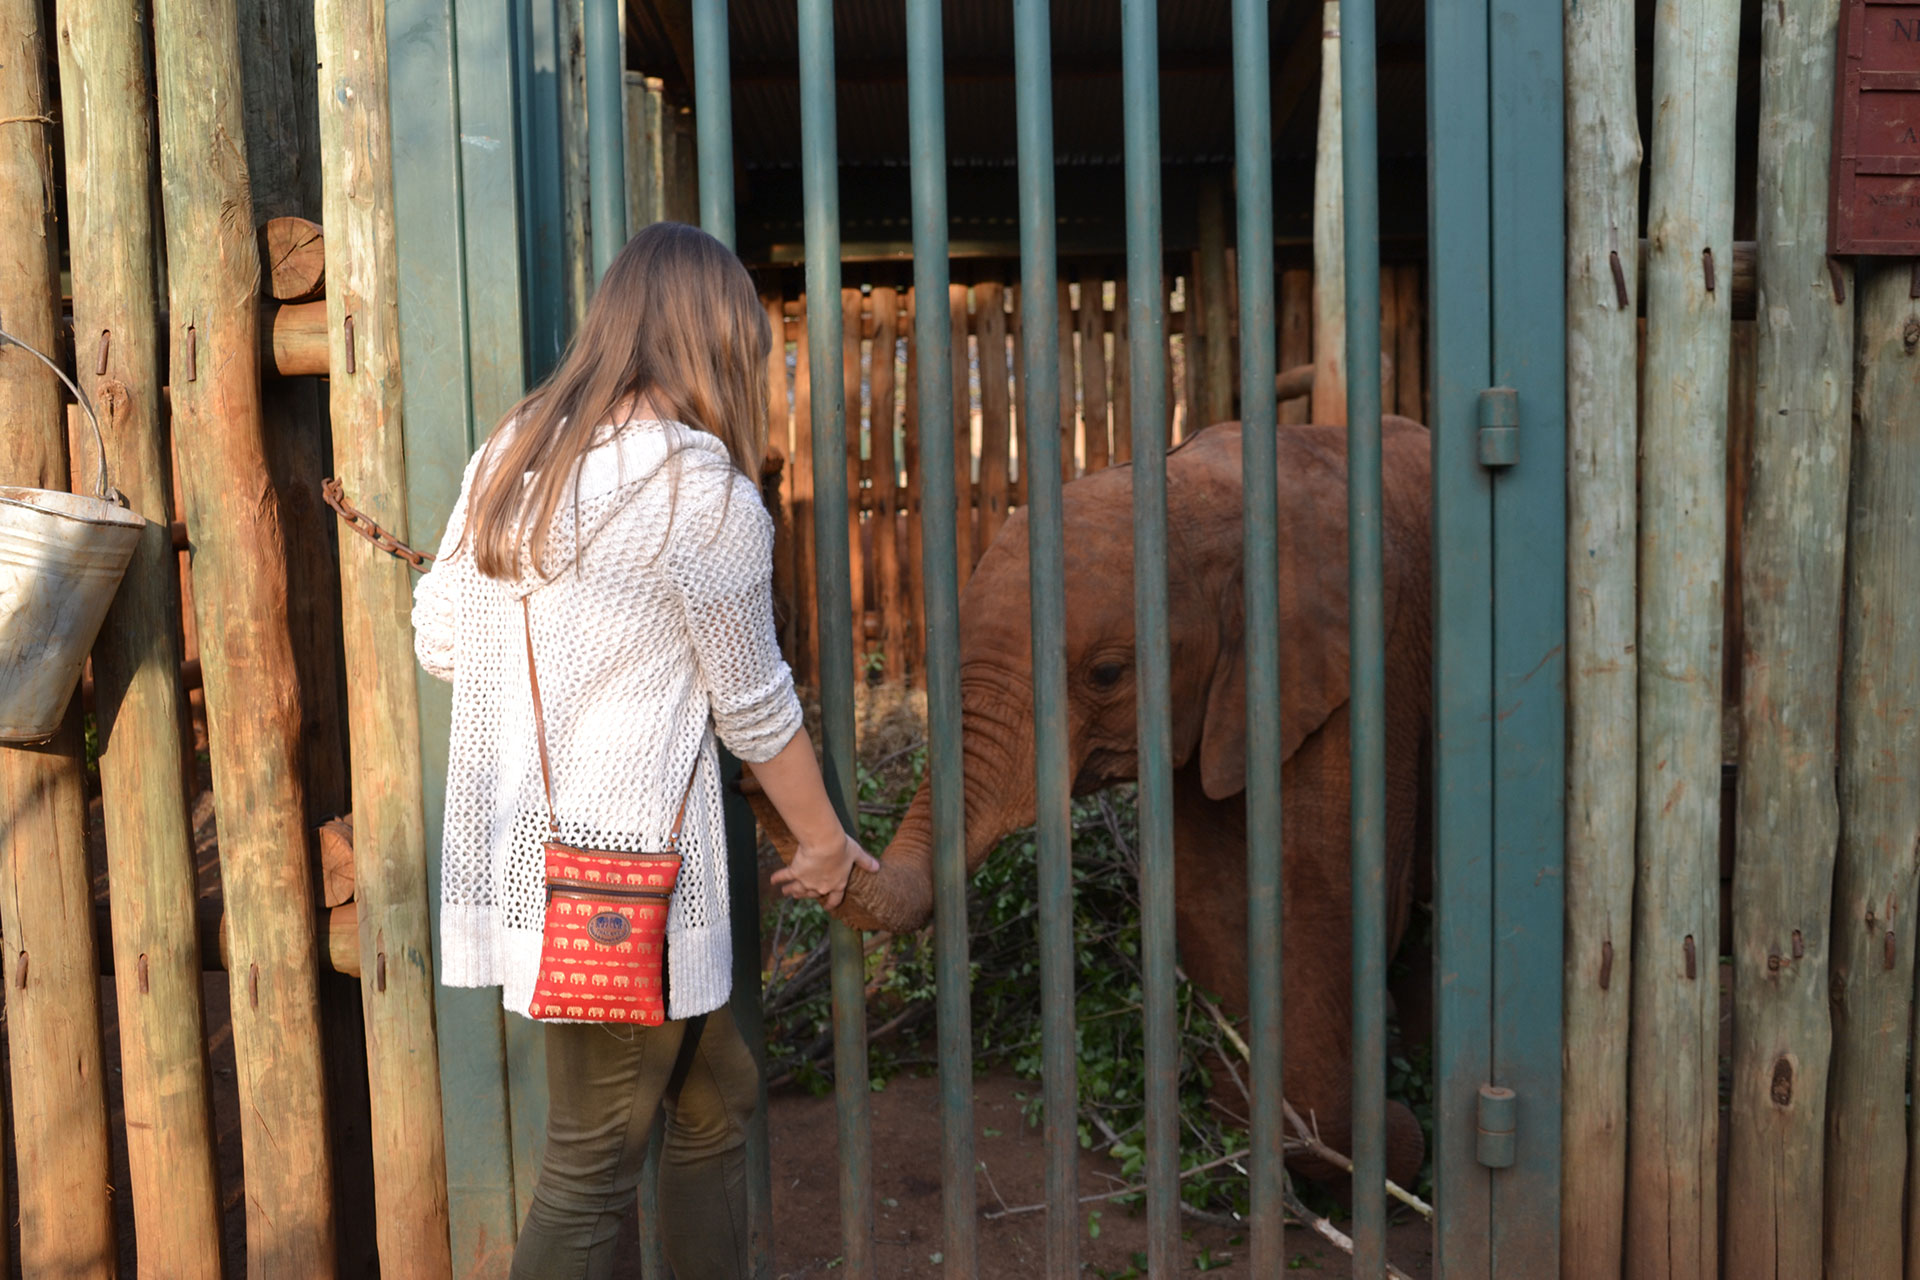 DSWT elephant human interaction